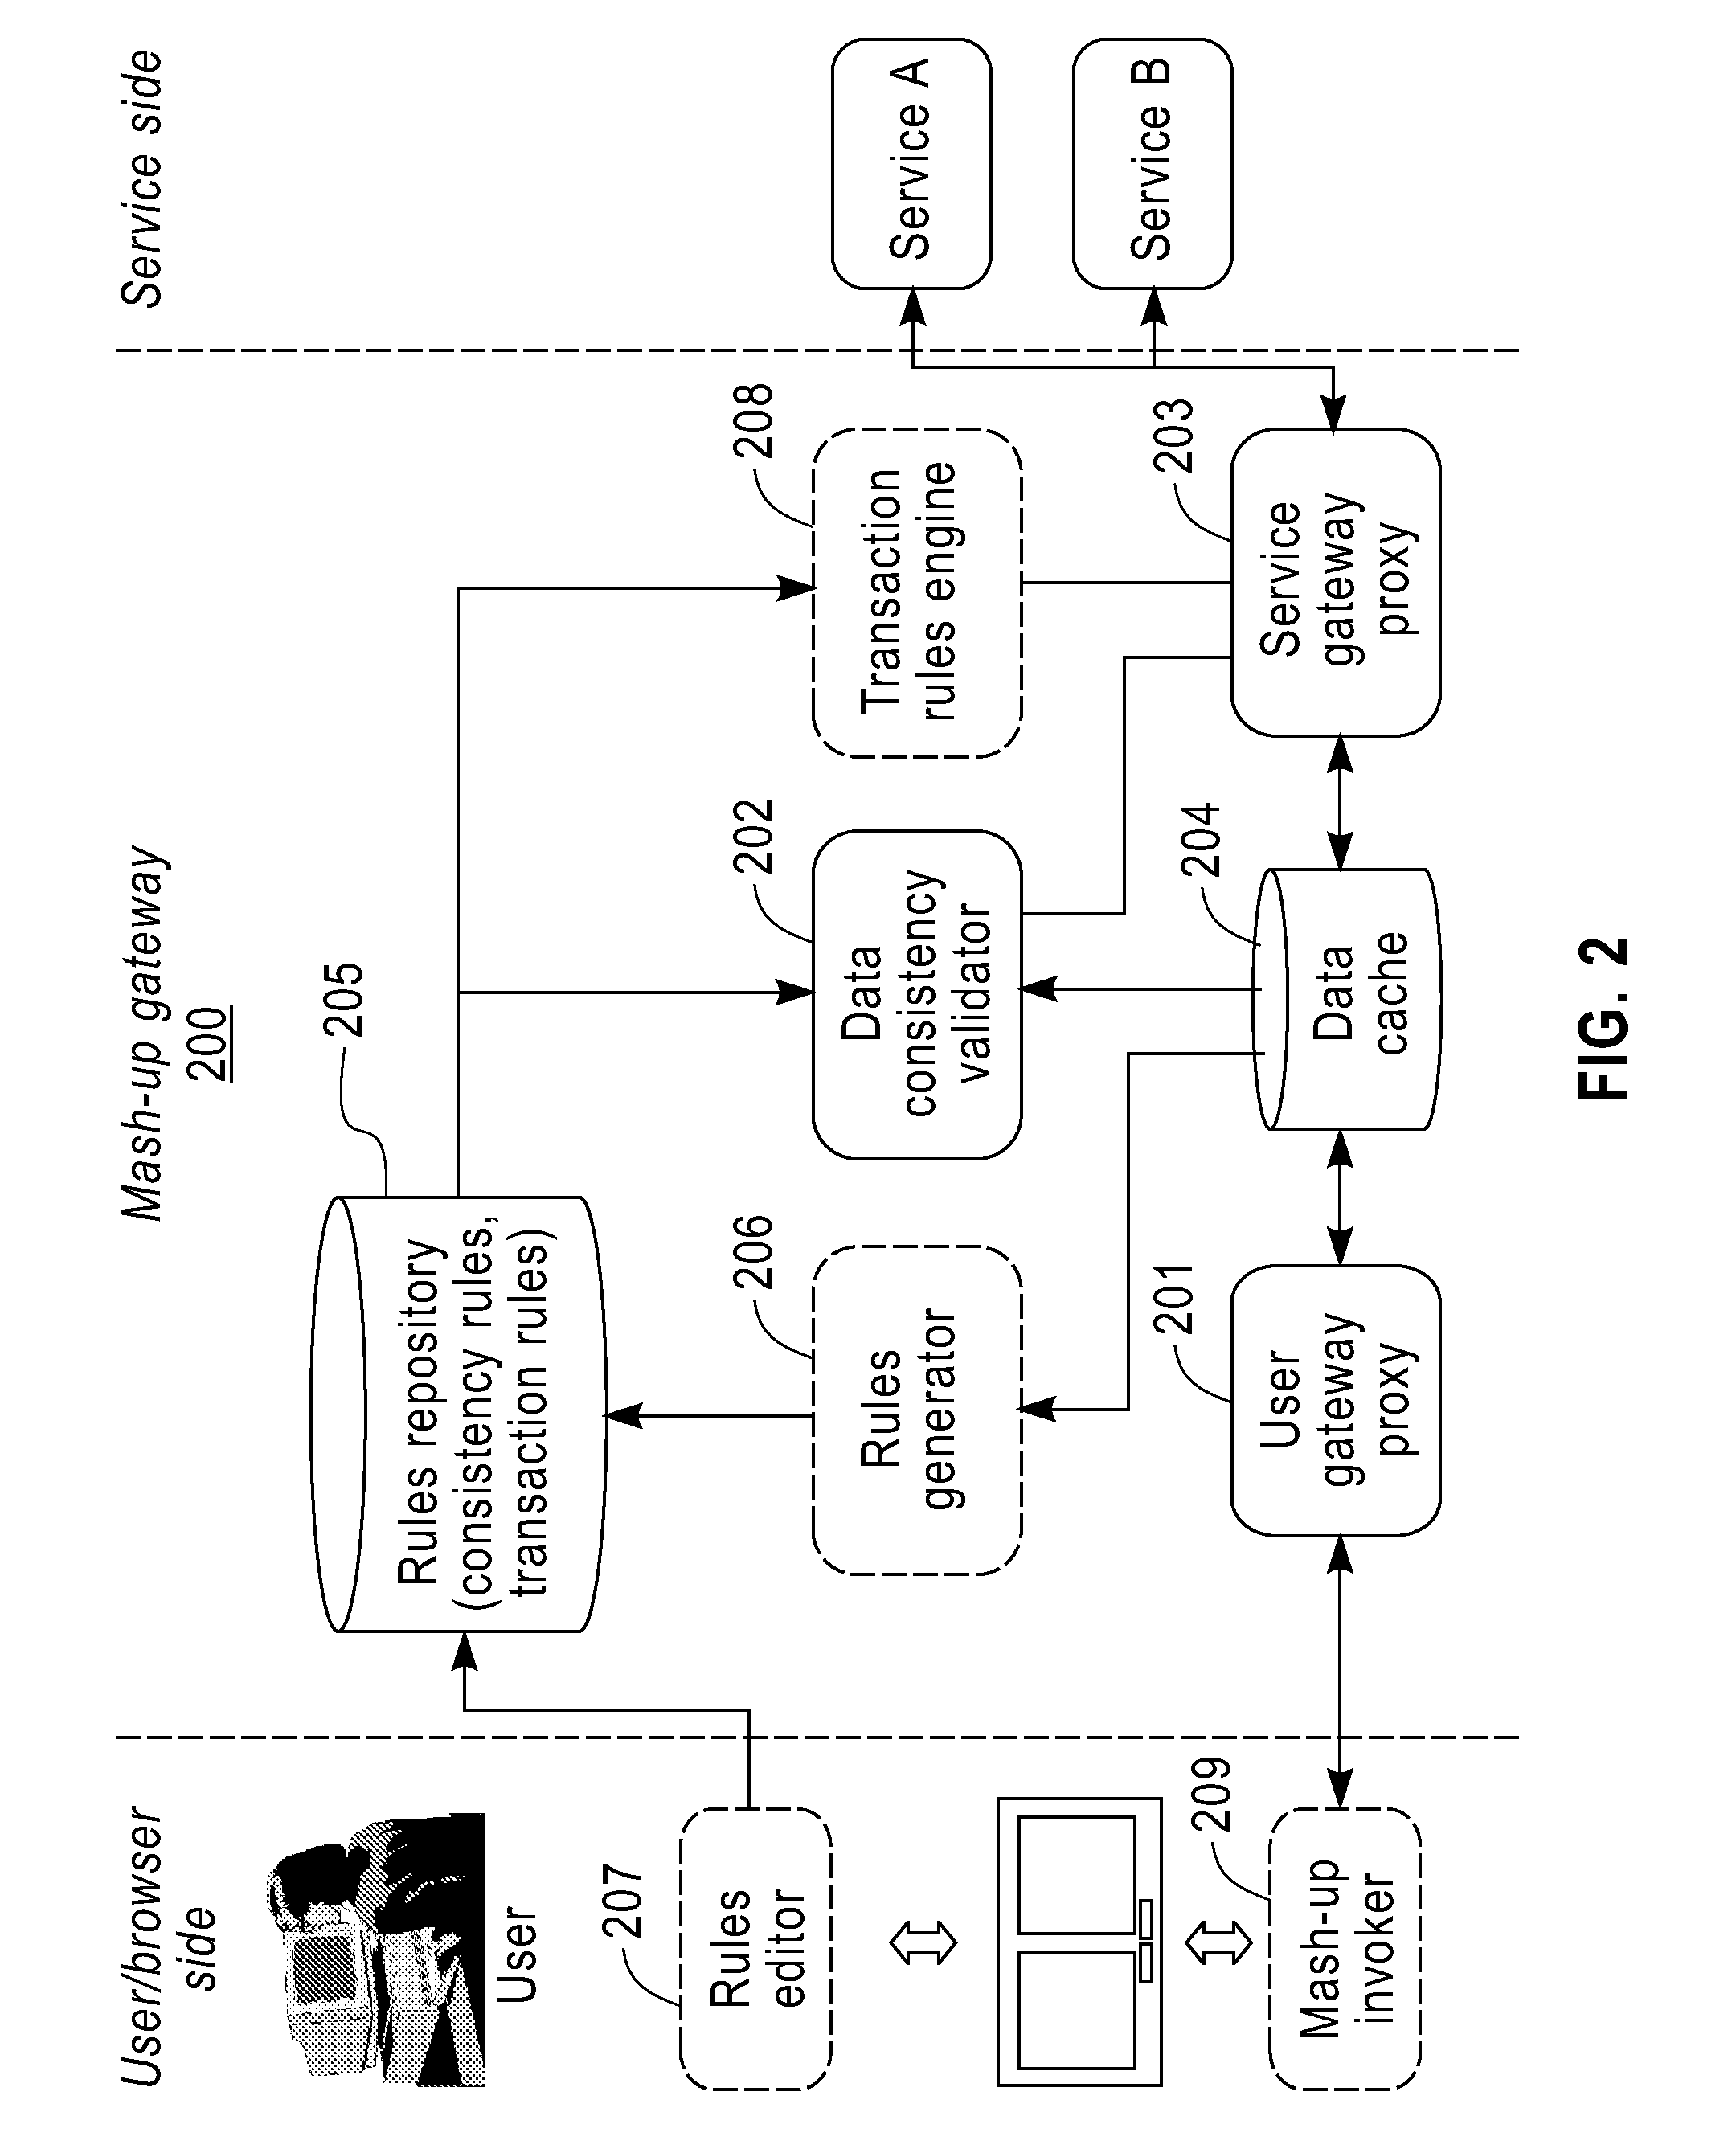 Method and apparatus for reliable mashup